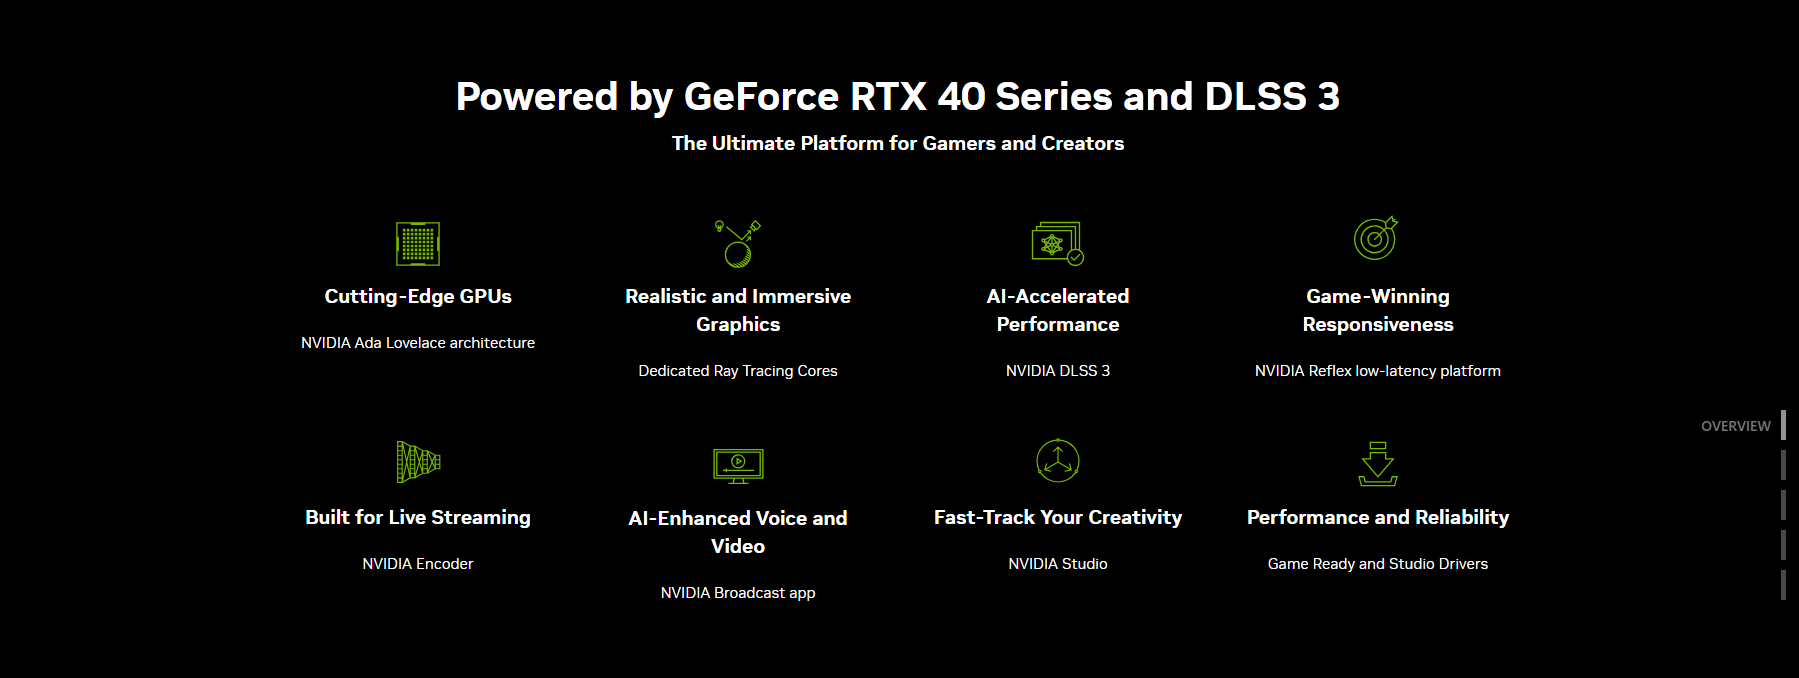 A large marketing image providing additional information about the product MSI GeForce RTX 4060 Ti Gaming X Slim 8GB GDDR6 - Black - Additional alt info not provided